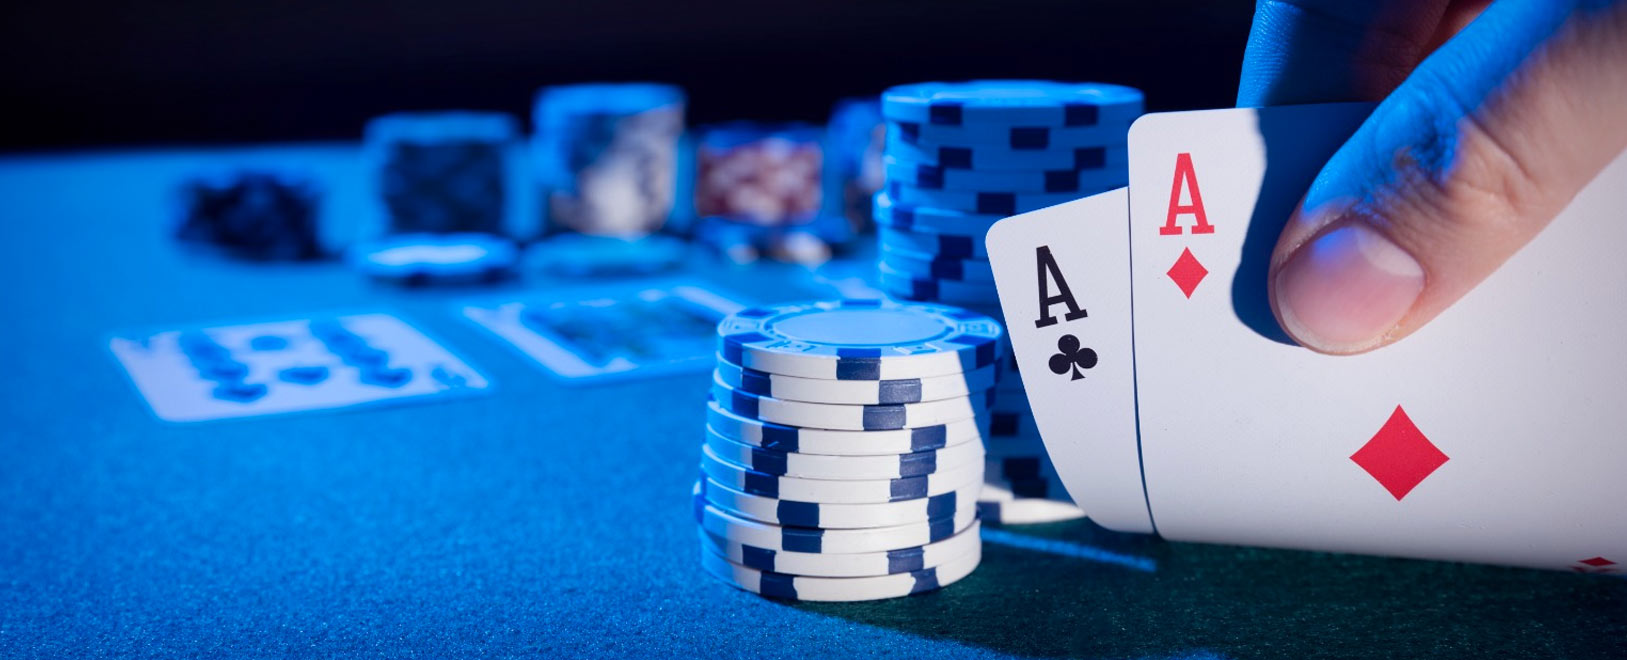 Learn how to play Zone Poker with Ignition!